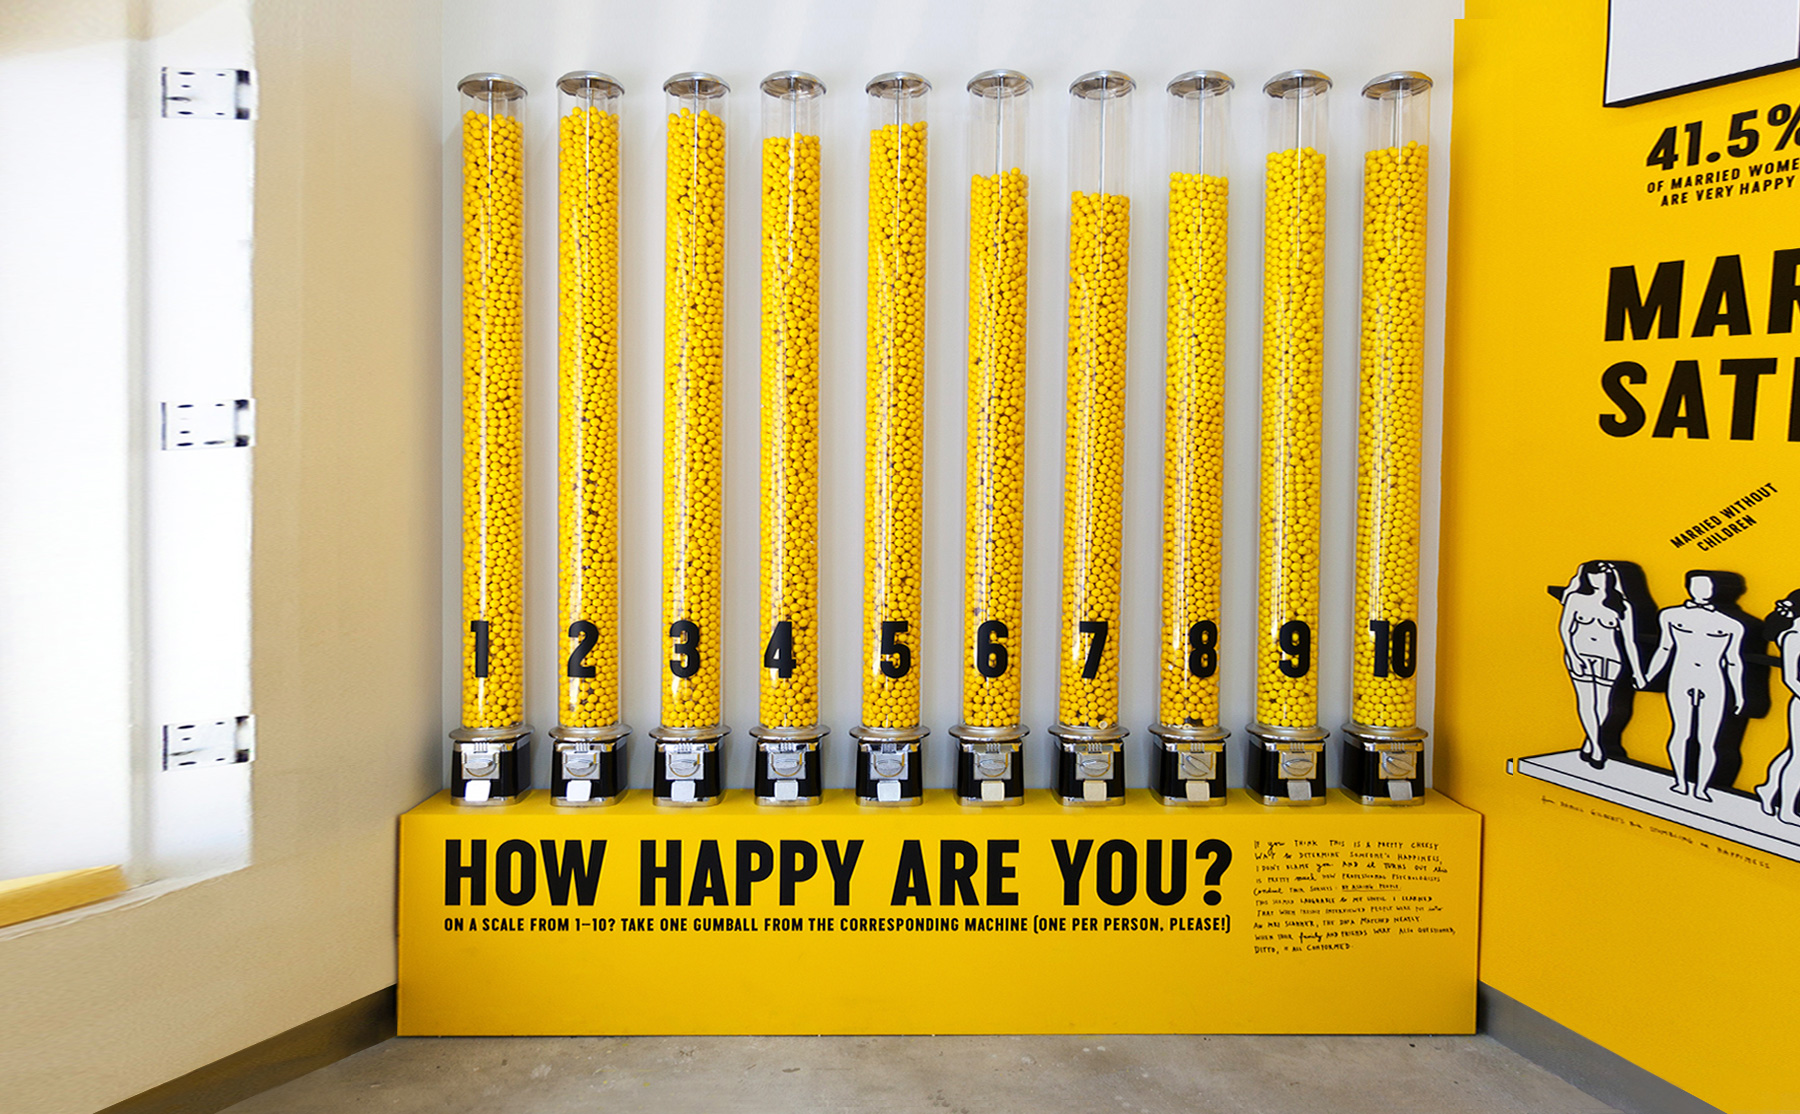 How happy are you?